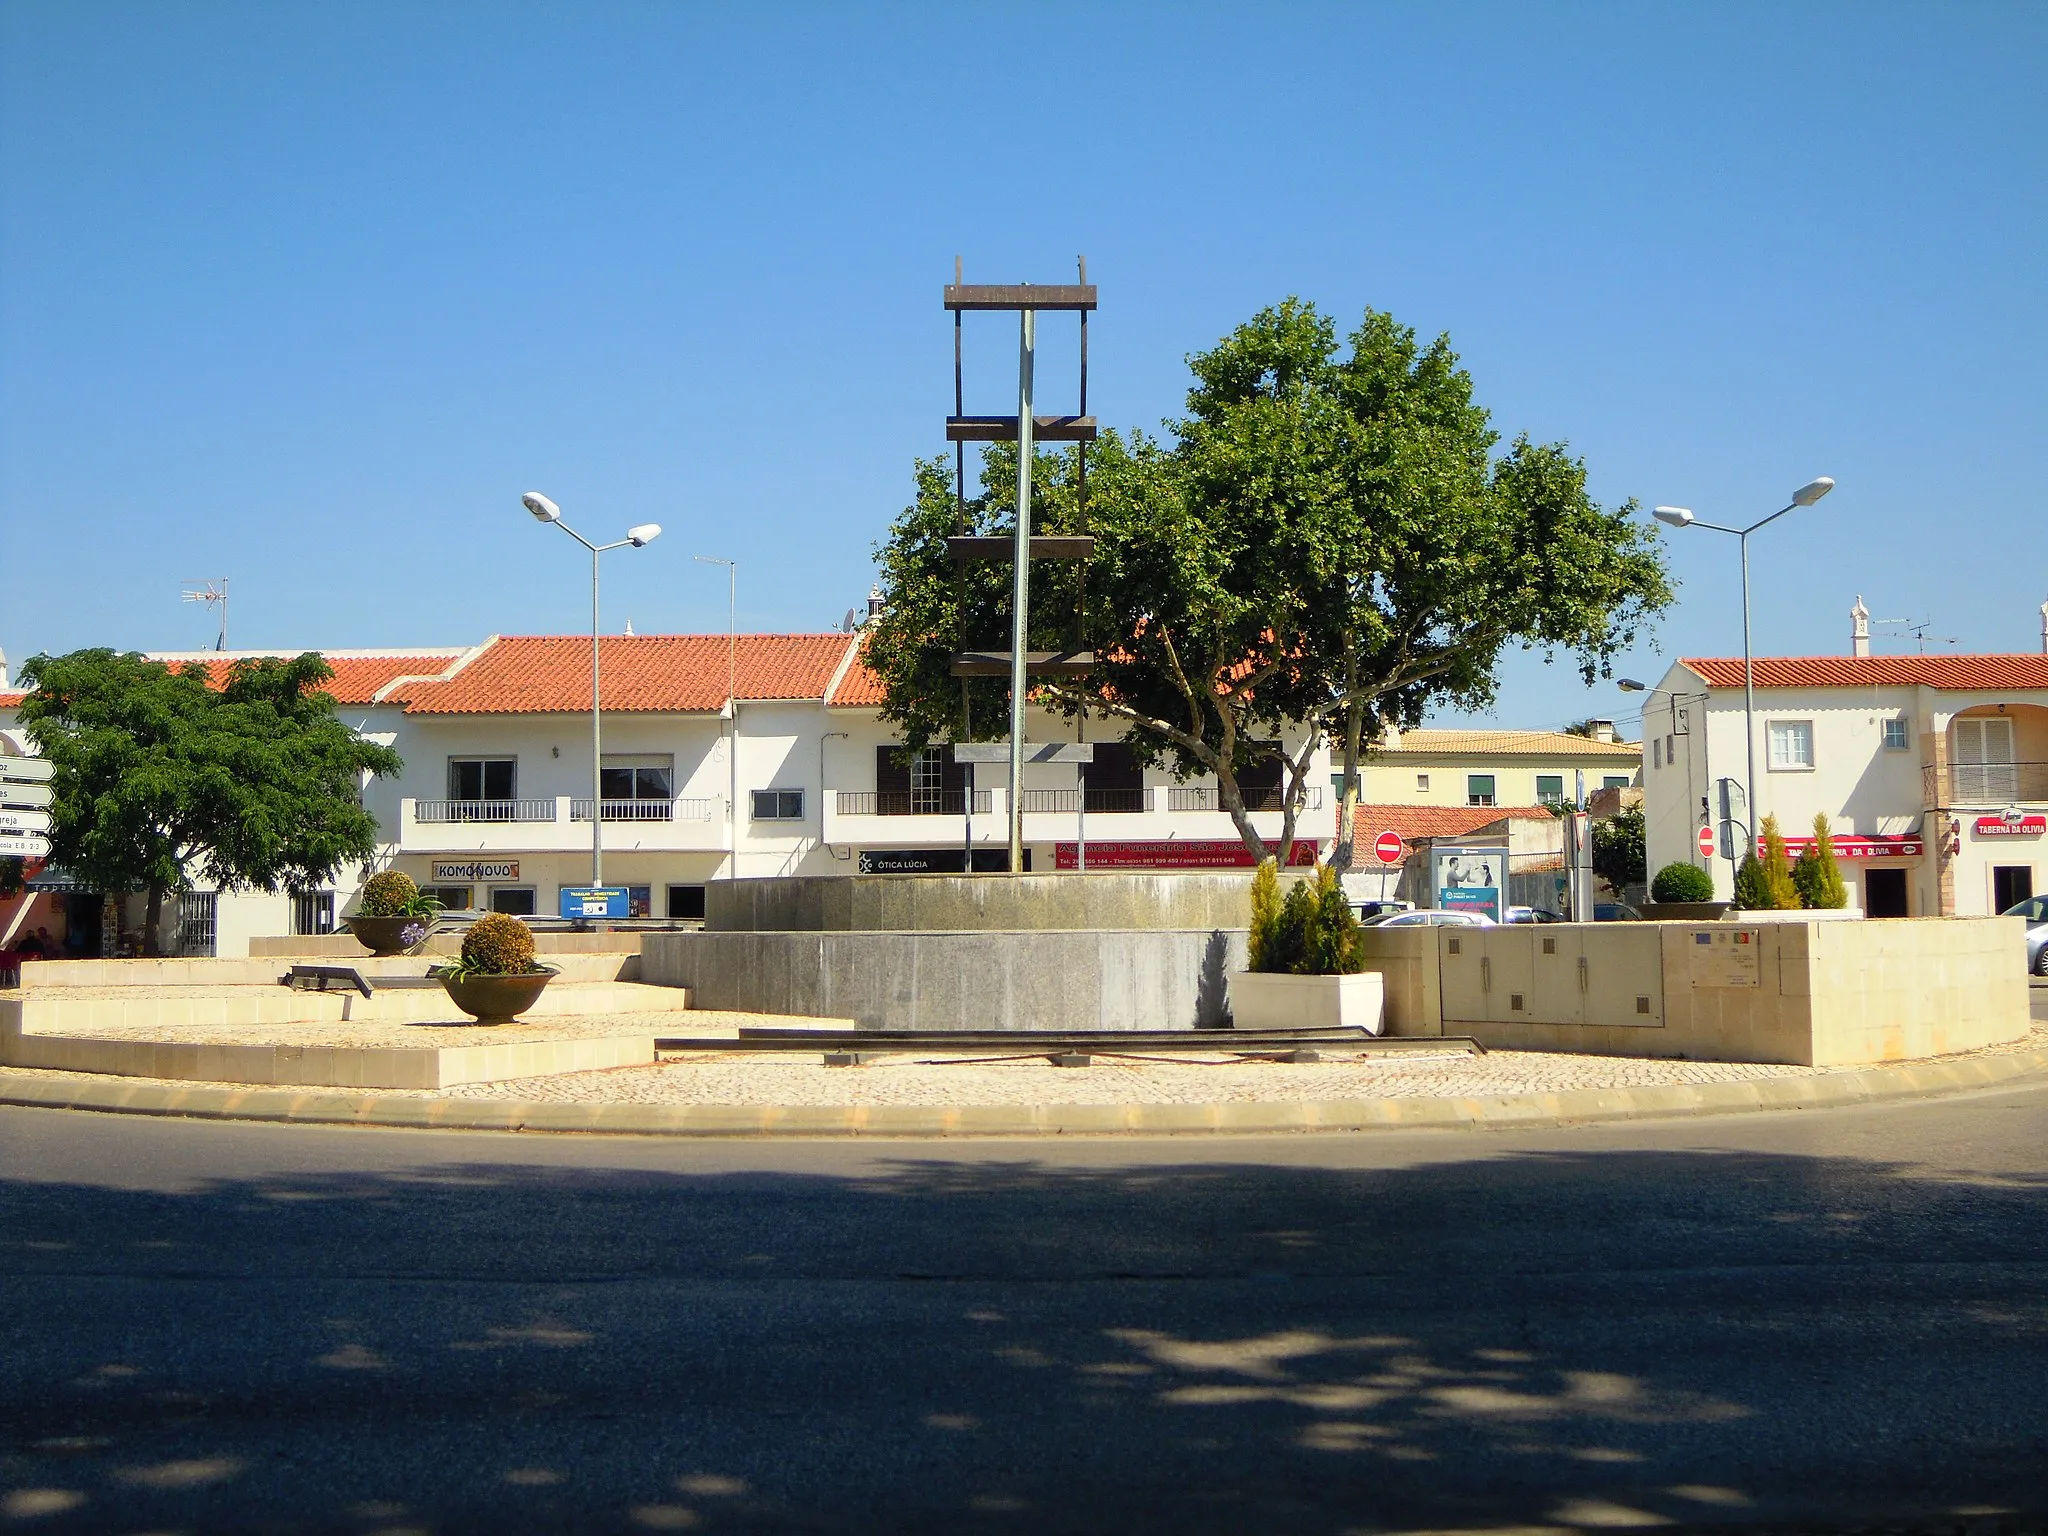 Photo showing: The Railway roundabout is at the centre of Largo das Ferreiras in the centre village of Ferreiras Albufeira, Algarve, Portugal.